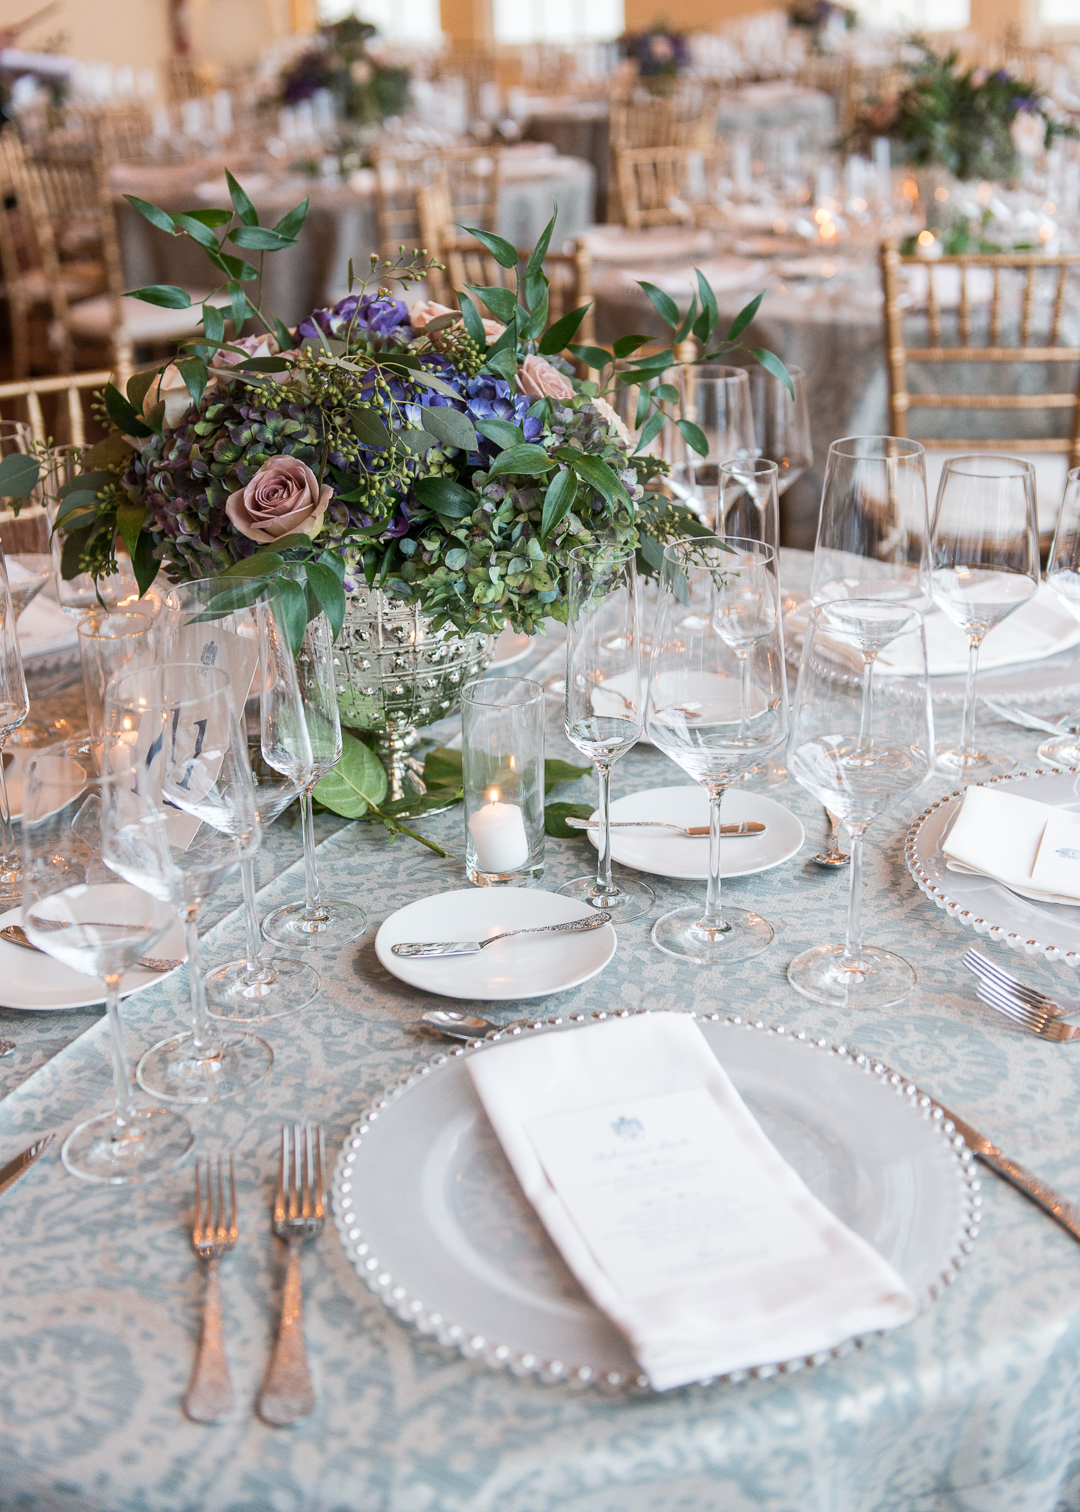 Elegant gold Chiavari chairs surround tables draped in blue and white linens. Tables are set with fine white china and crystal goblets. Centerpieces of hydrangeas, roses, and ferns are placed on each table.